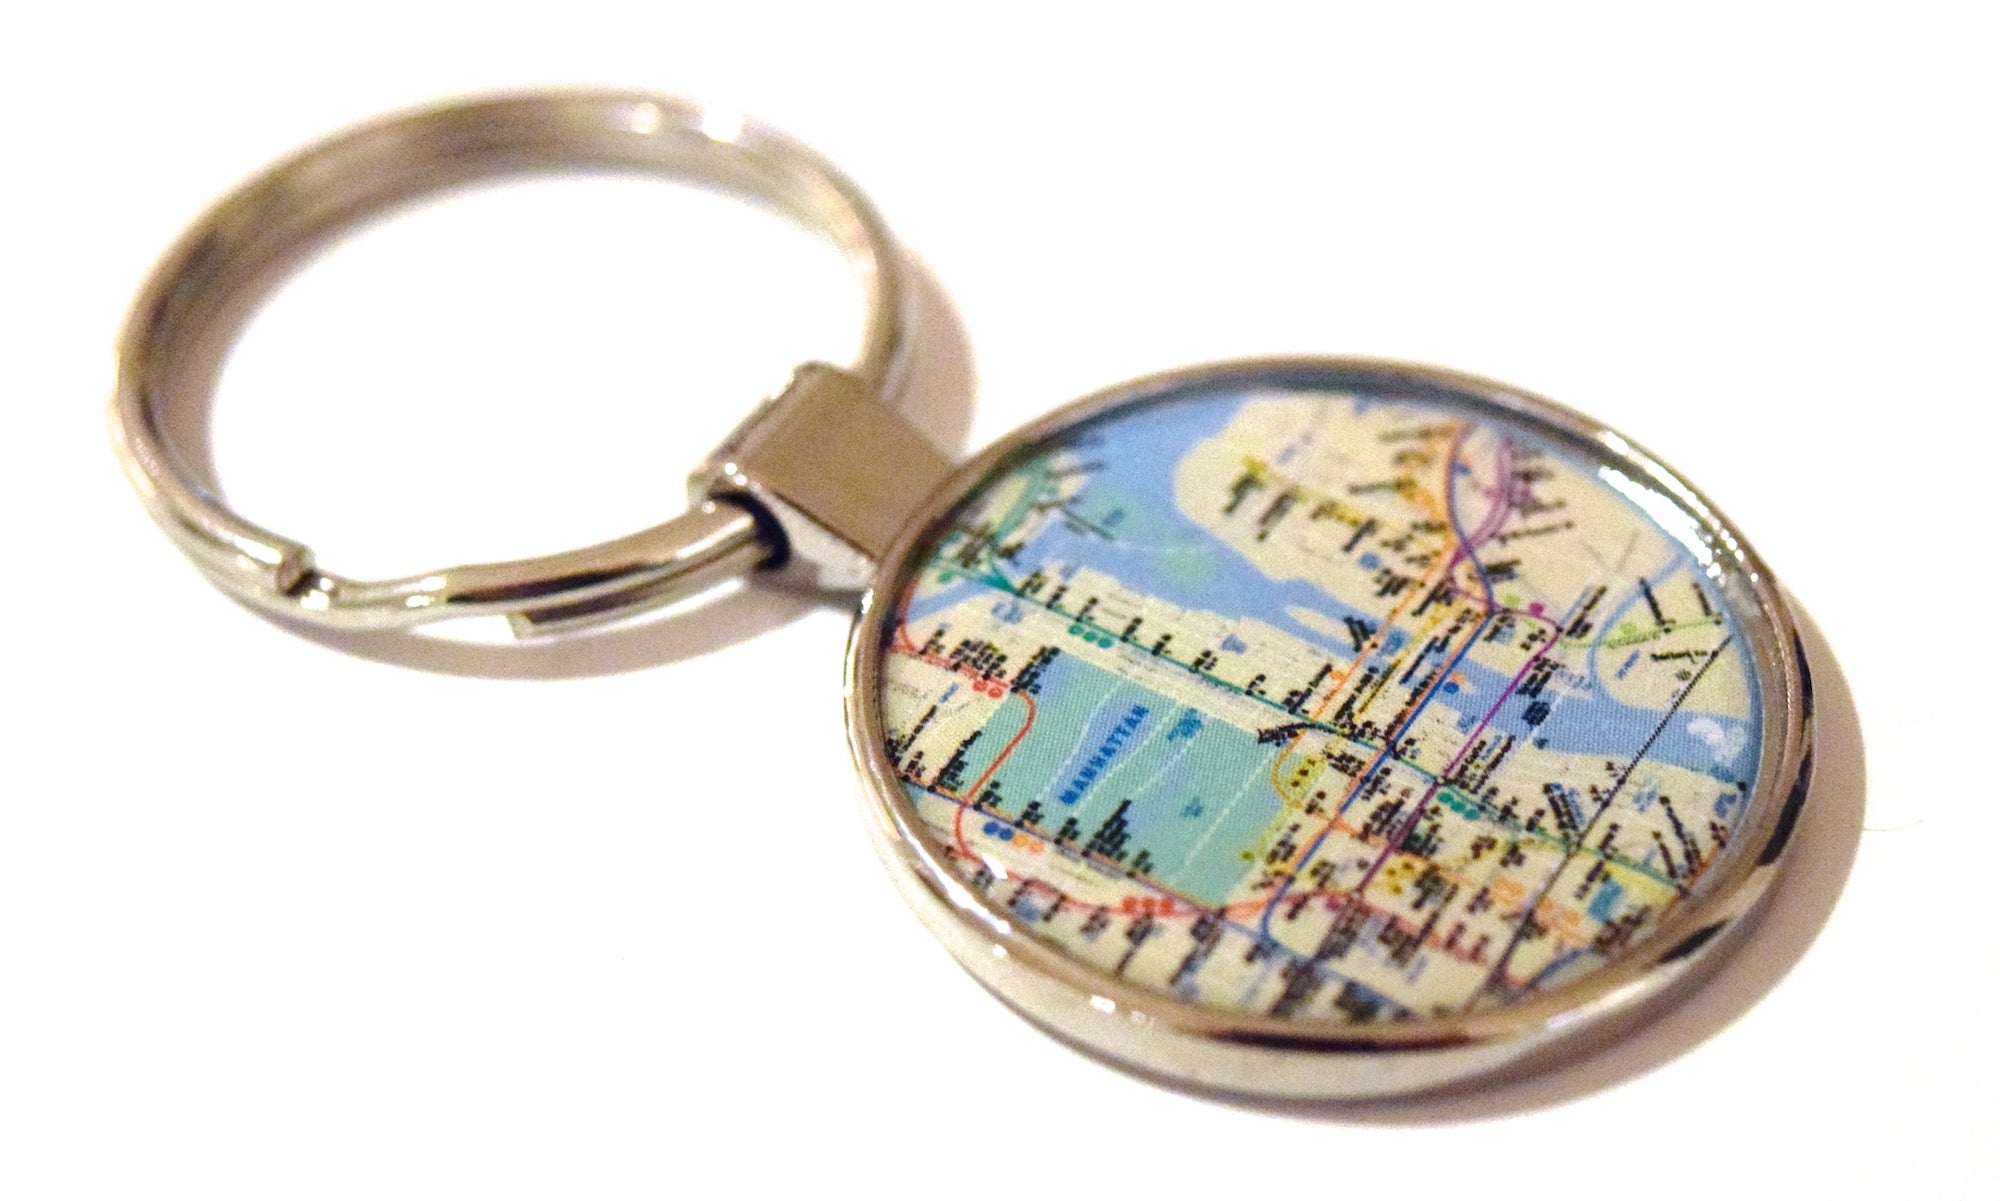 New York Keychains - Fifth Avenue Manufacturers